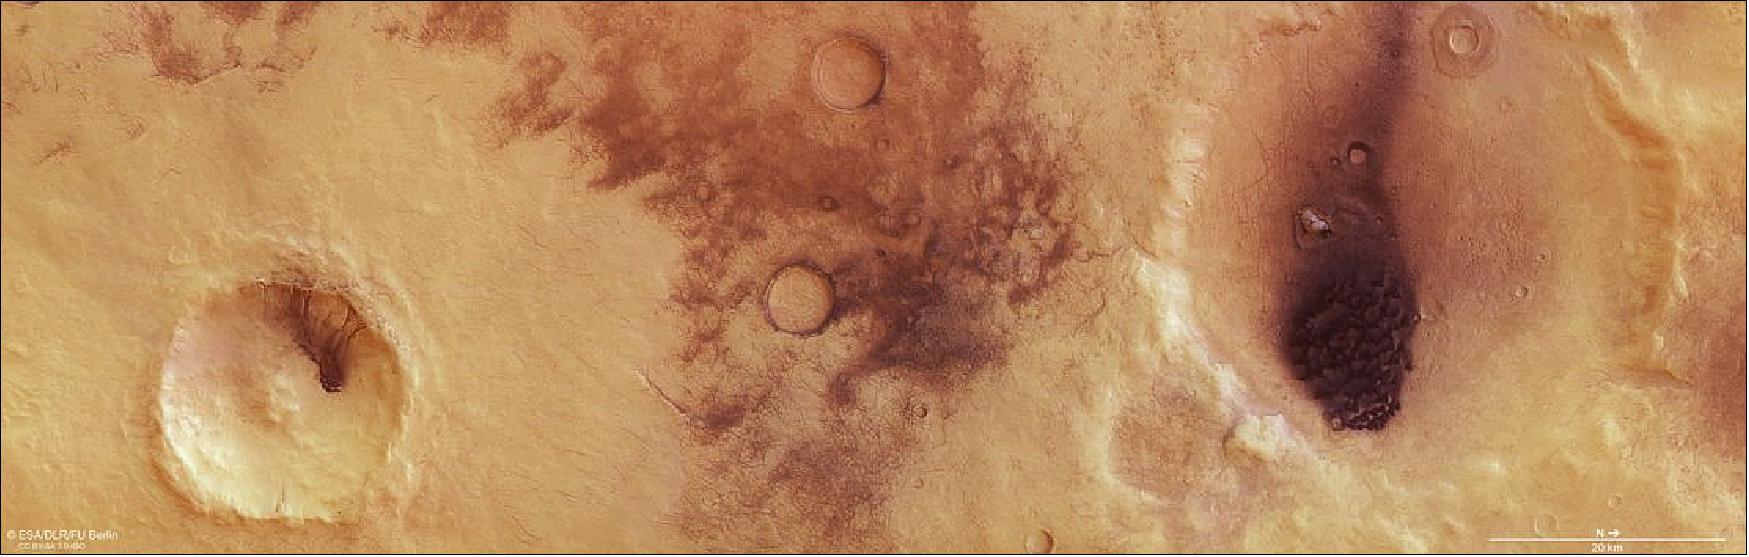 Figure 46: This image from ESA's Mars Express shows Chalcoporos Rupes, a region on Mars that shows signs of dust and wind activity. It comprises data gathered on 3 January 2019 during Mars Express Orbit 18983. The ground resolution is approximately 13 m/pixel and the images are centered at about 23º East and 53º South. This image was created using data from the nadir and color channels of the High Resolution Stereo Camera (HRSC). The nadir channel is aligned perpendicular to the surface of Mars, as if looking straight down at the surface. North is to the right (image credit: ESA/DLR/FU Berlin, CC BY-SA 3.0 IGO)